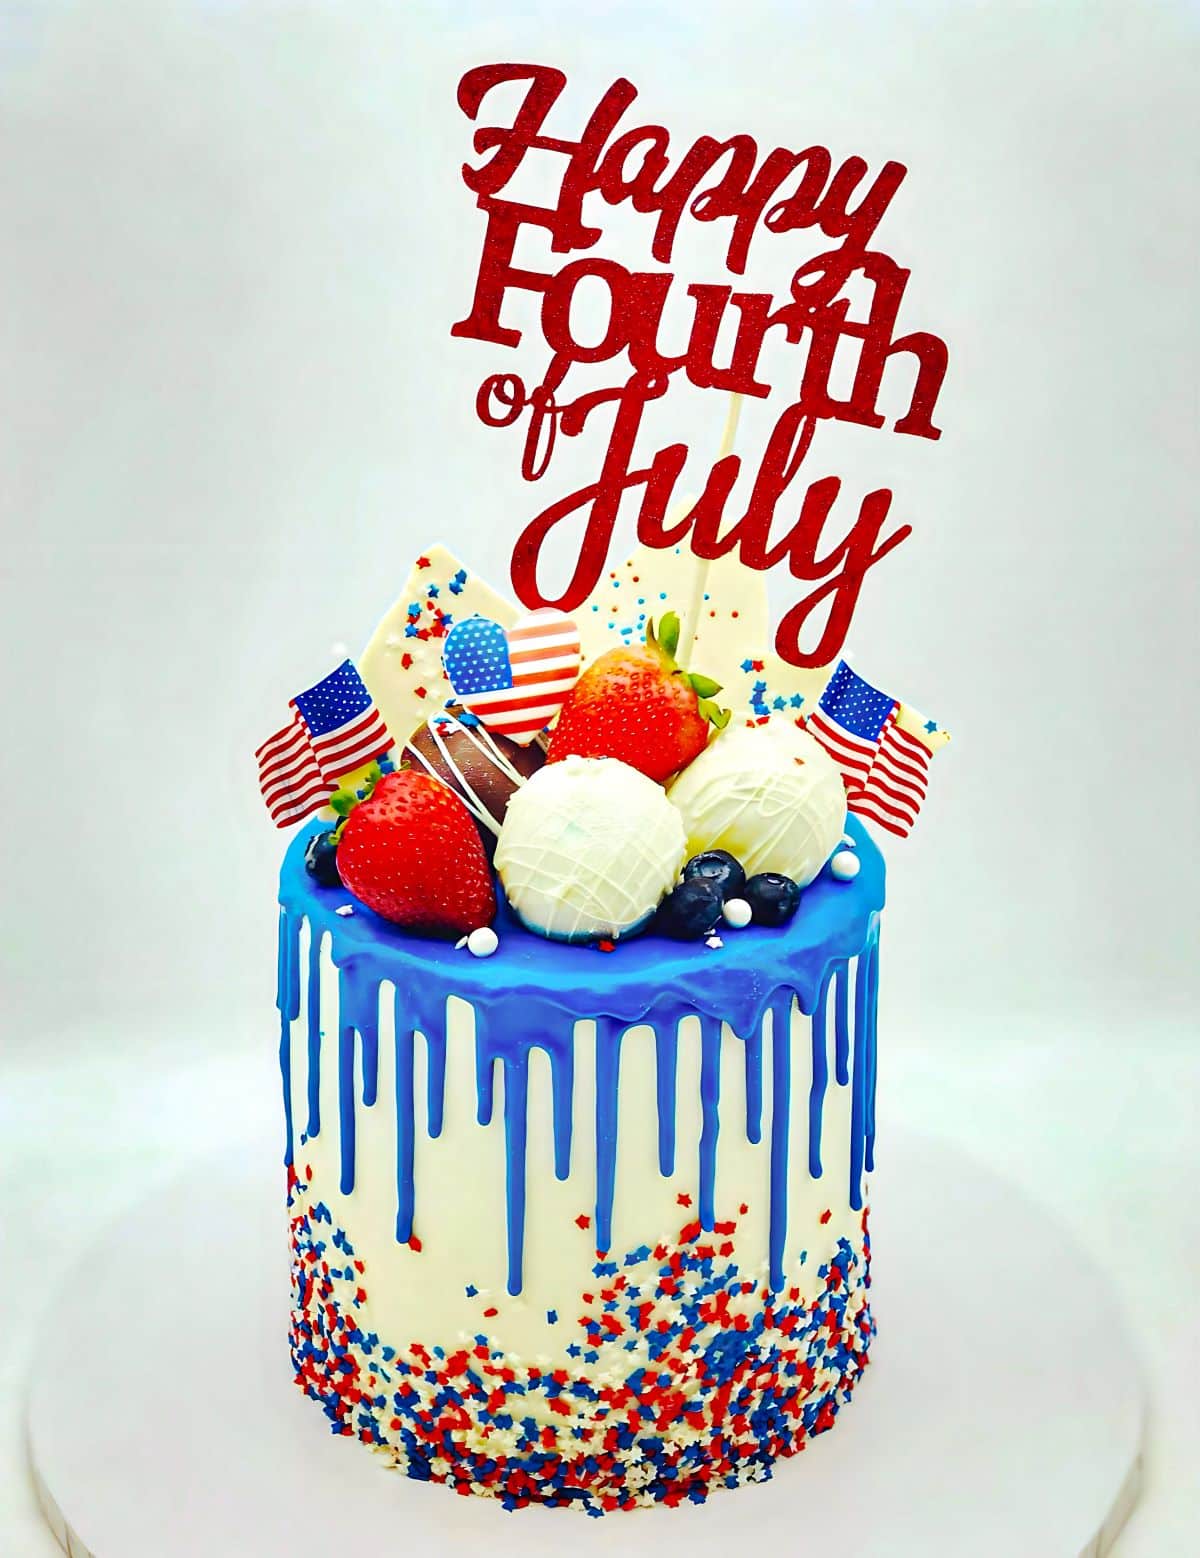 A cake banner that says "happy fourth of july" stuck into a tall decorated cake with red, white and blue.